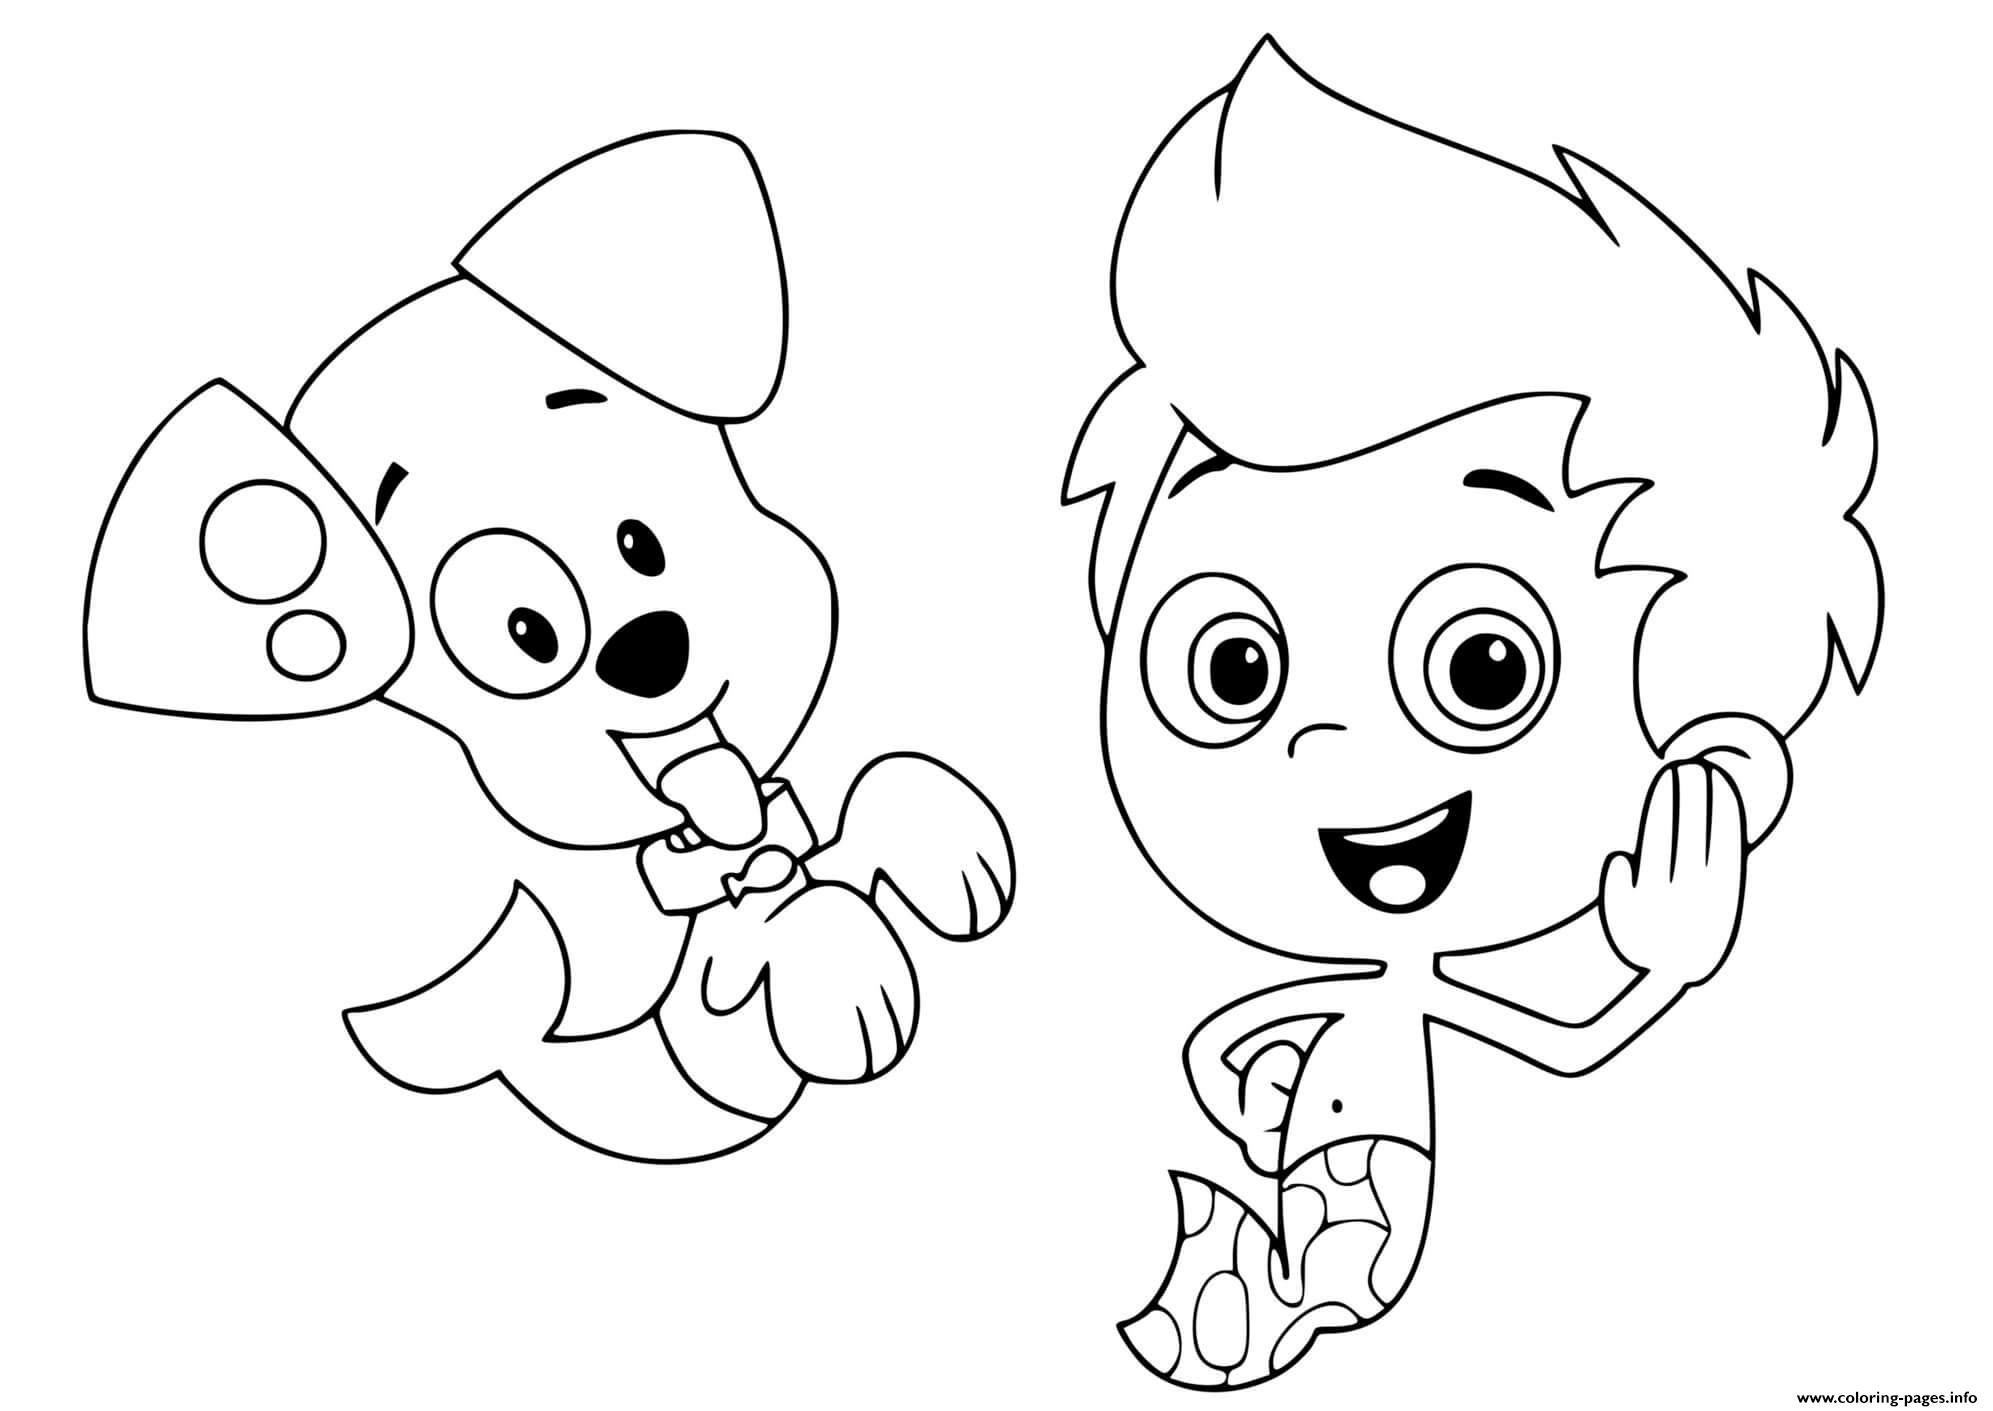 Download Bubble Guppies Nick Jr Coloring Pages Printable